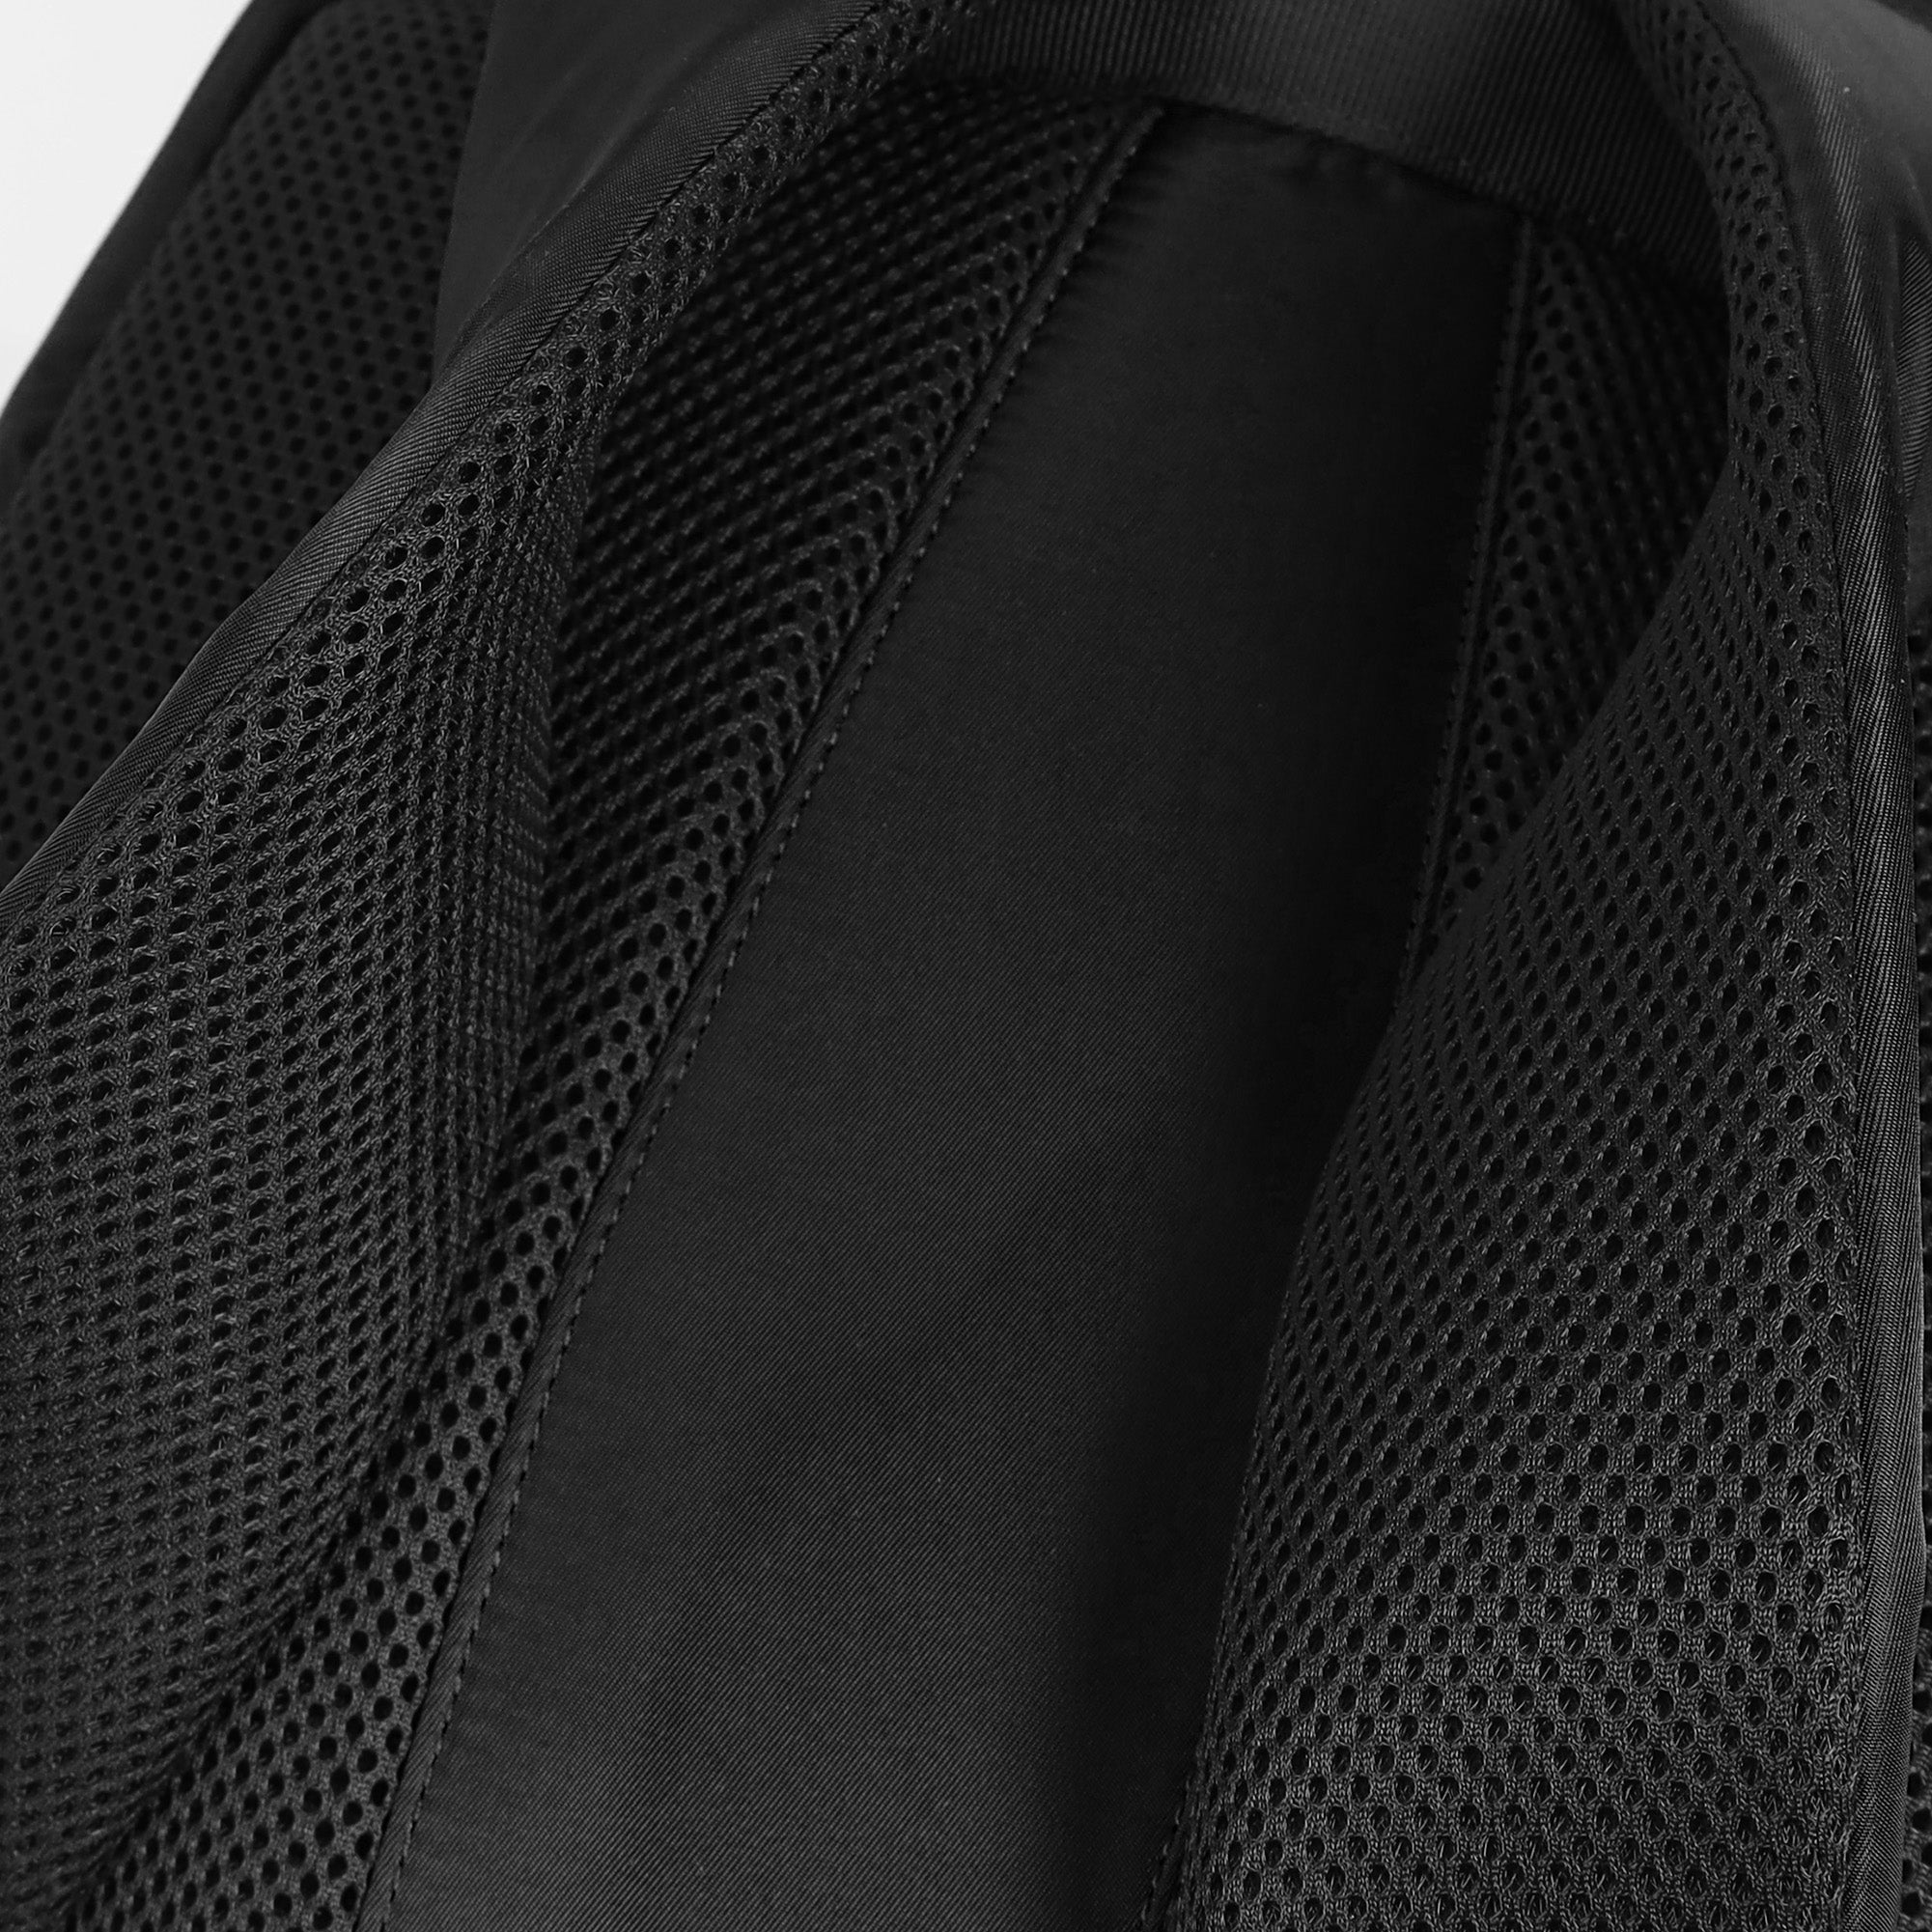 (Buy 2 15% Off)POLYESTER BACKPACK